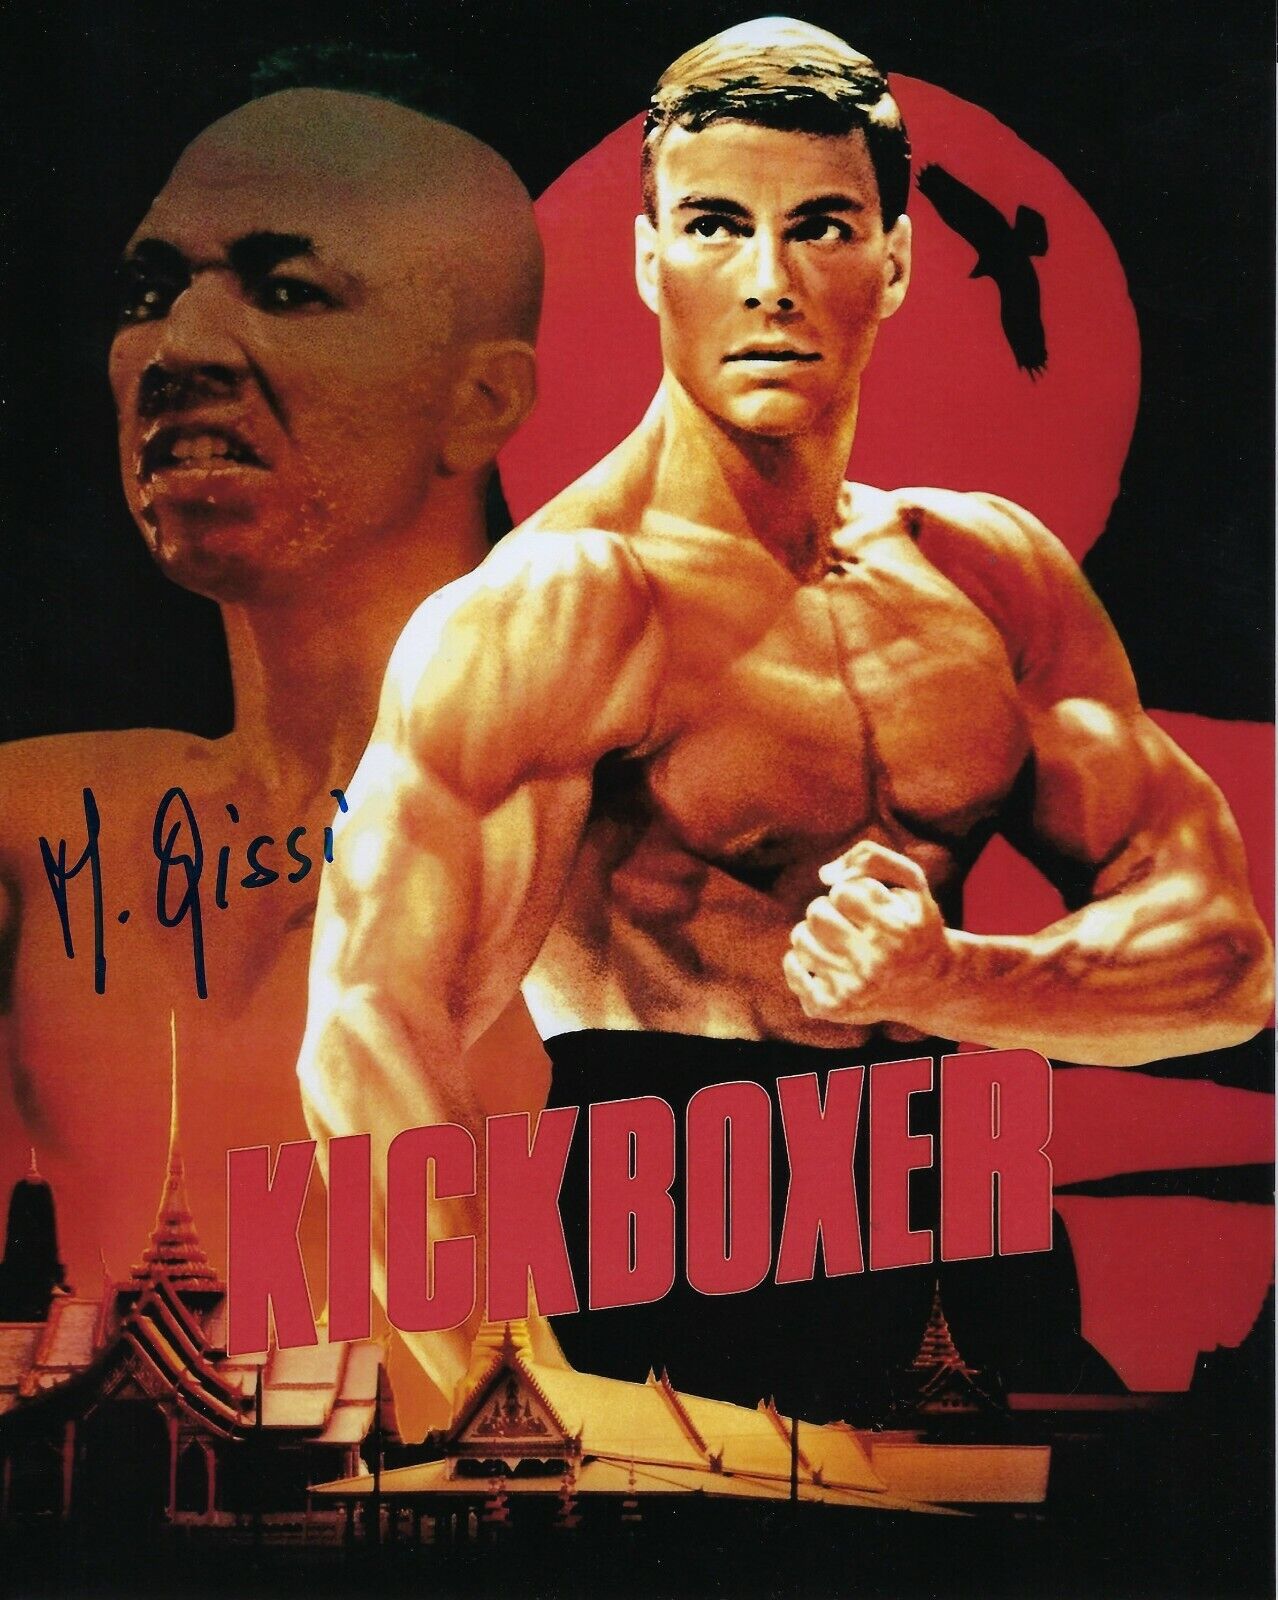 GFA Kickboxer Movie 2 Tong Po * MICHEL QISSI * Signed 8x10 Photo Poster painting PROOF MH9 COA